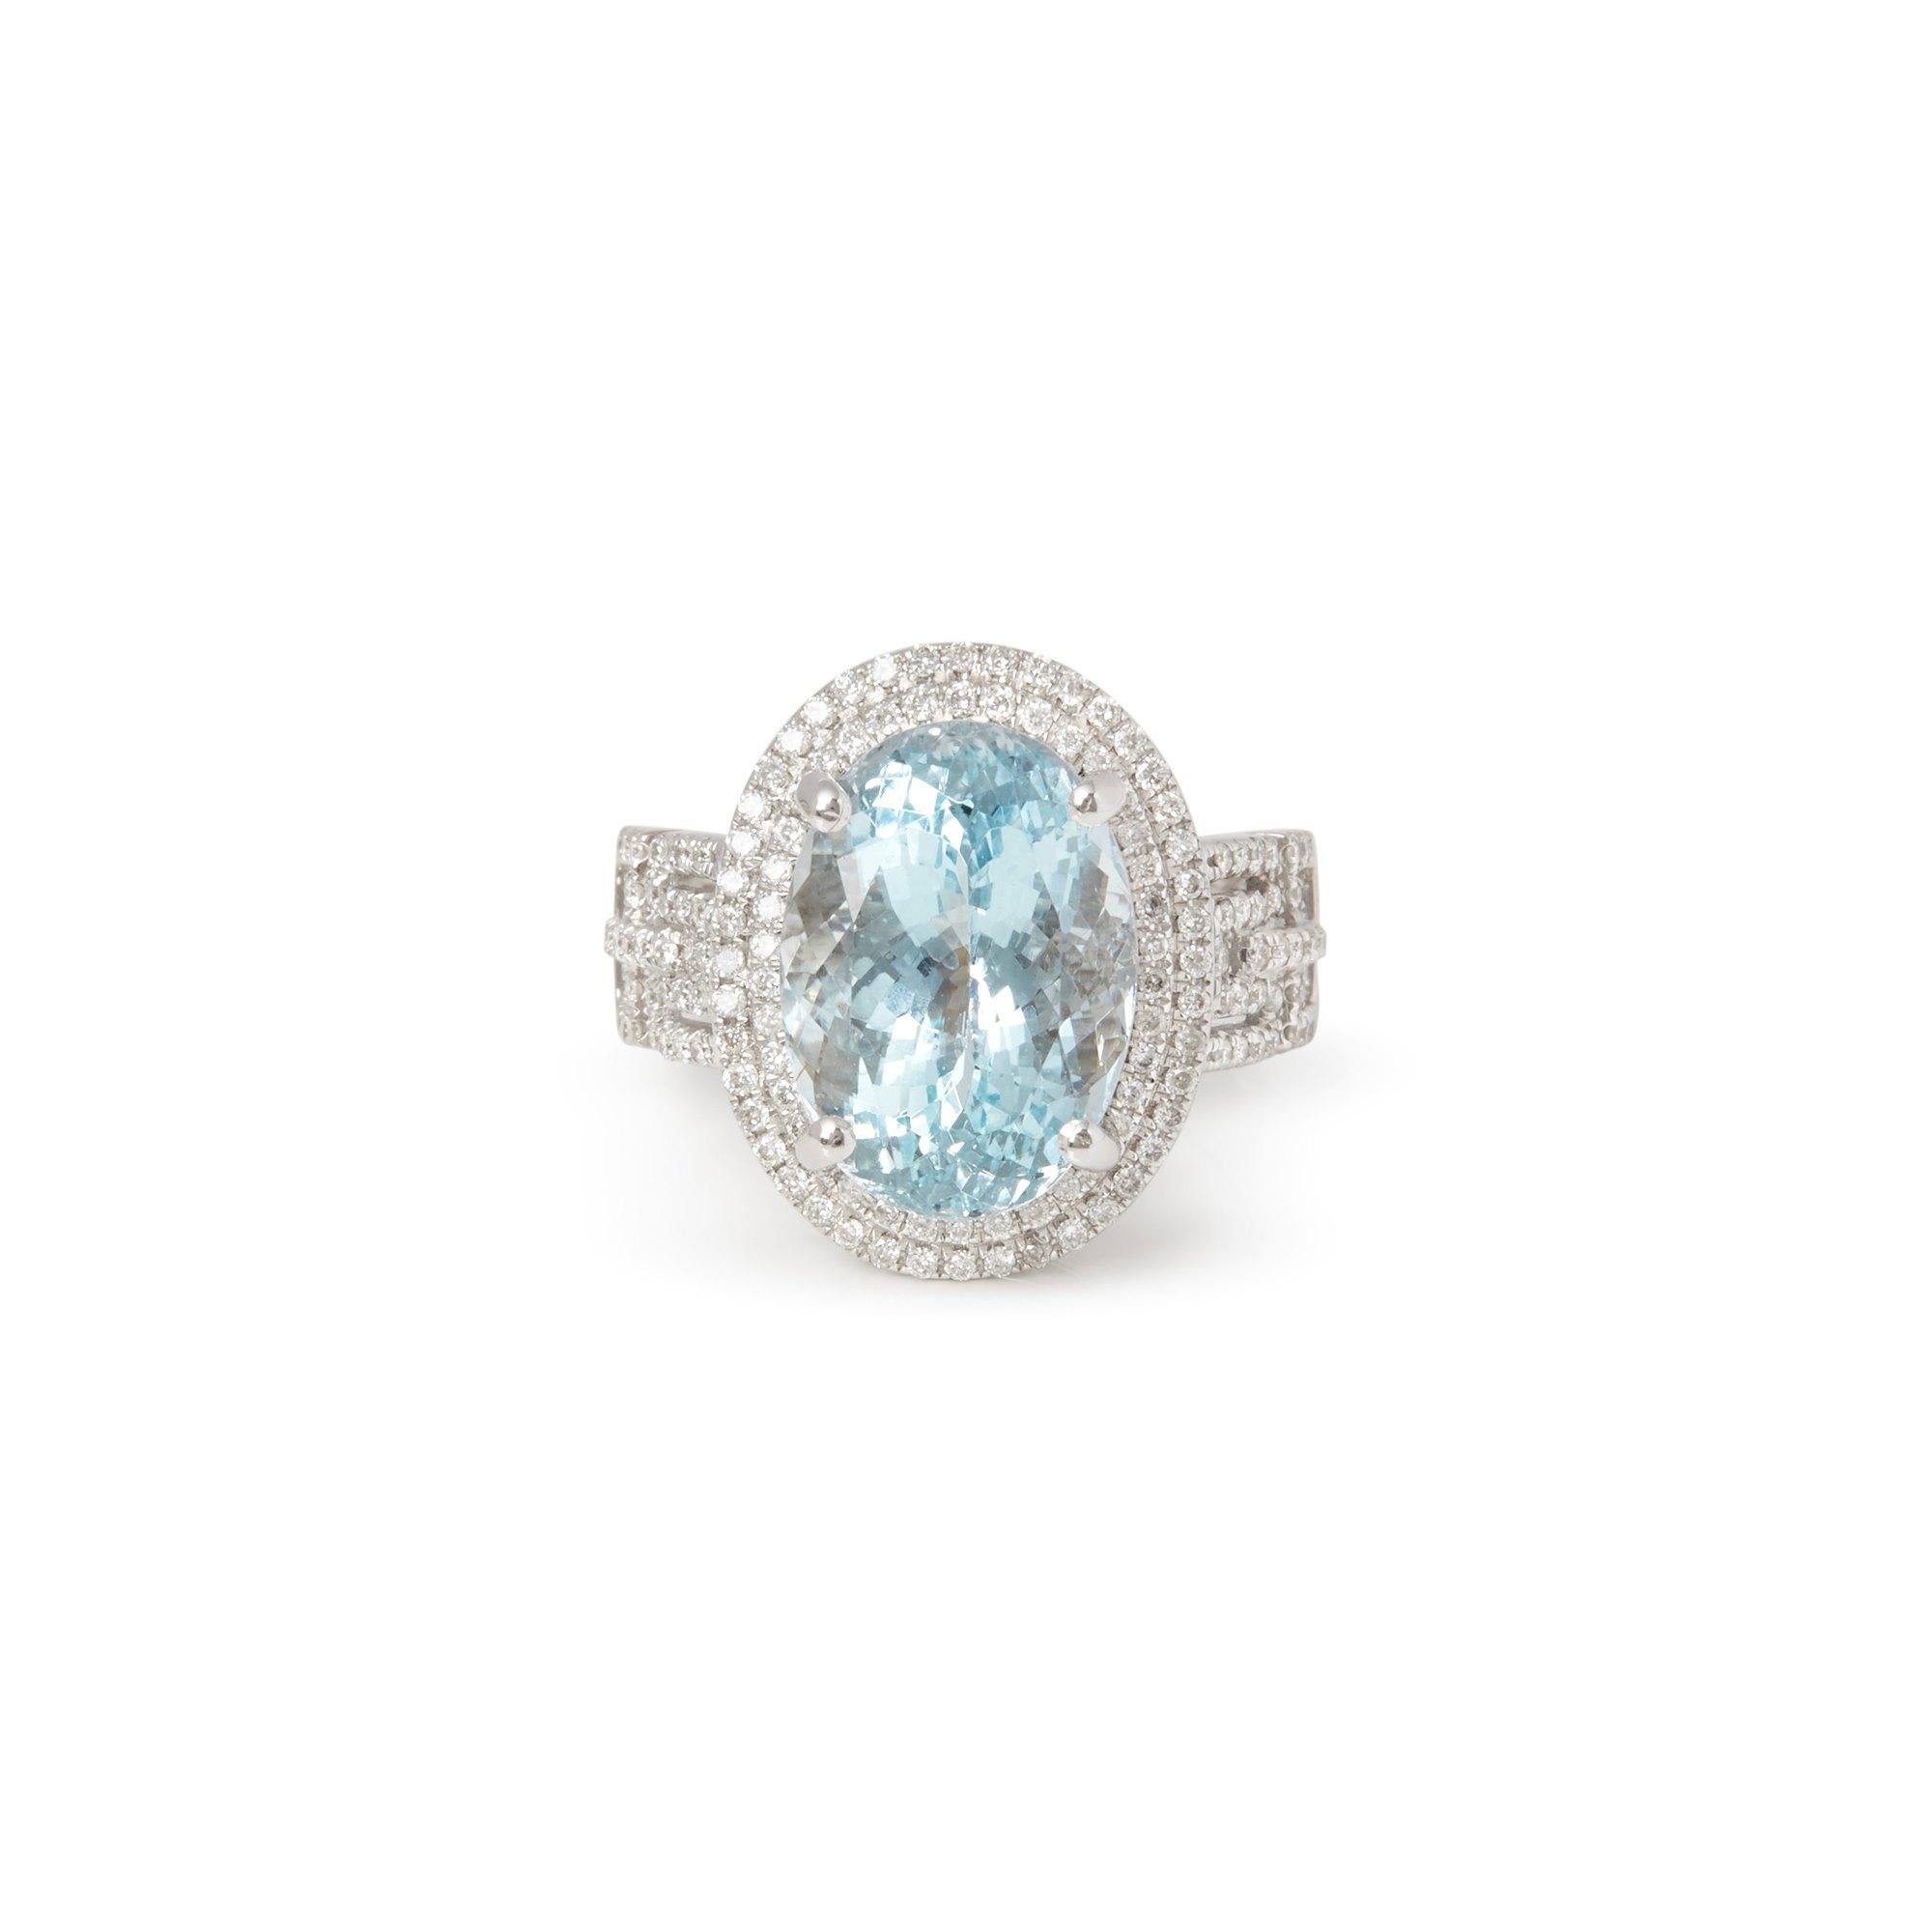 This ring designed by David Jerome is from his private collection and features one oval cut Aquamarine totalling 6.82cts sourced in Brazil. Set with round brilliant cut diamonds totalling 0.58cts mounted in an 18k white gold setting. Finger size UK